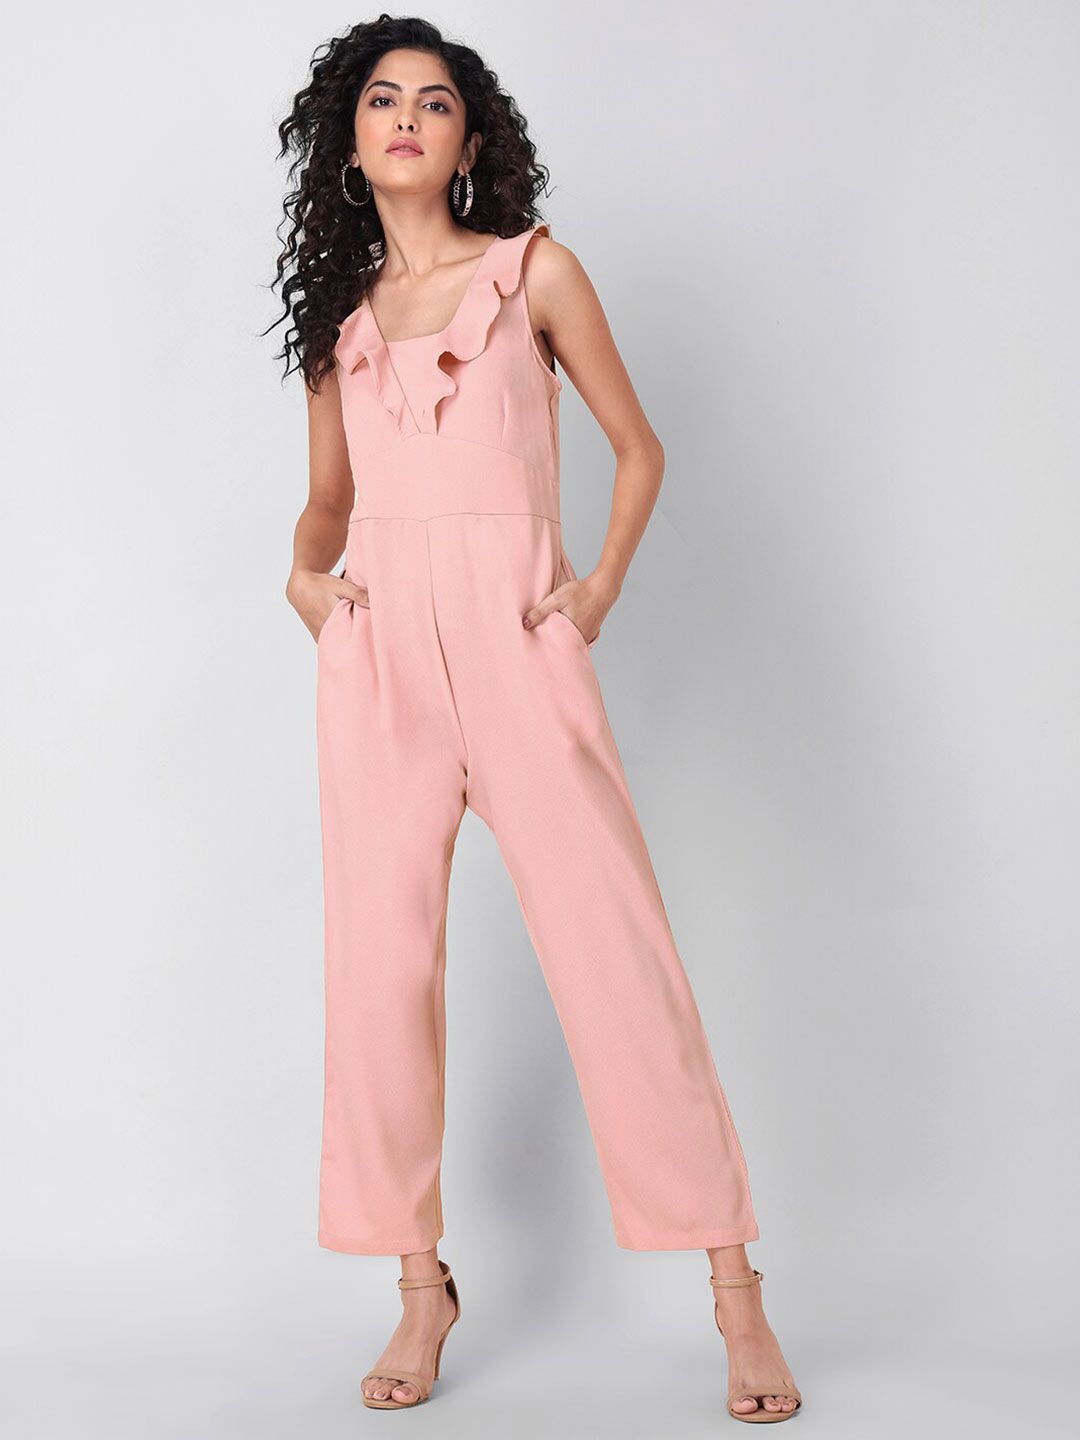 FabAlley Pink Ruffles Basic Jumpsuit Price in India